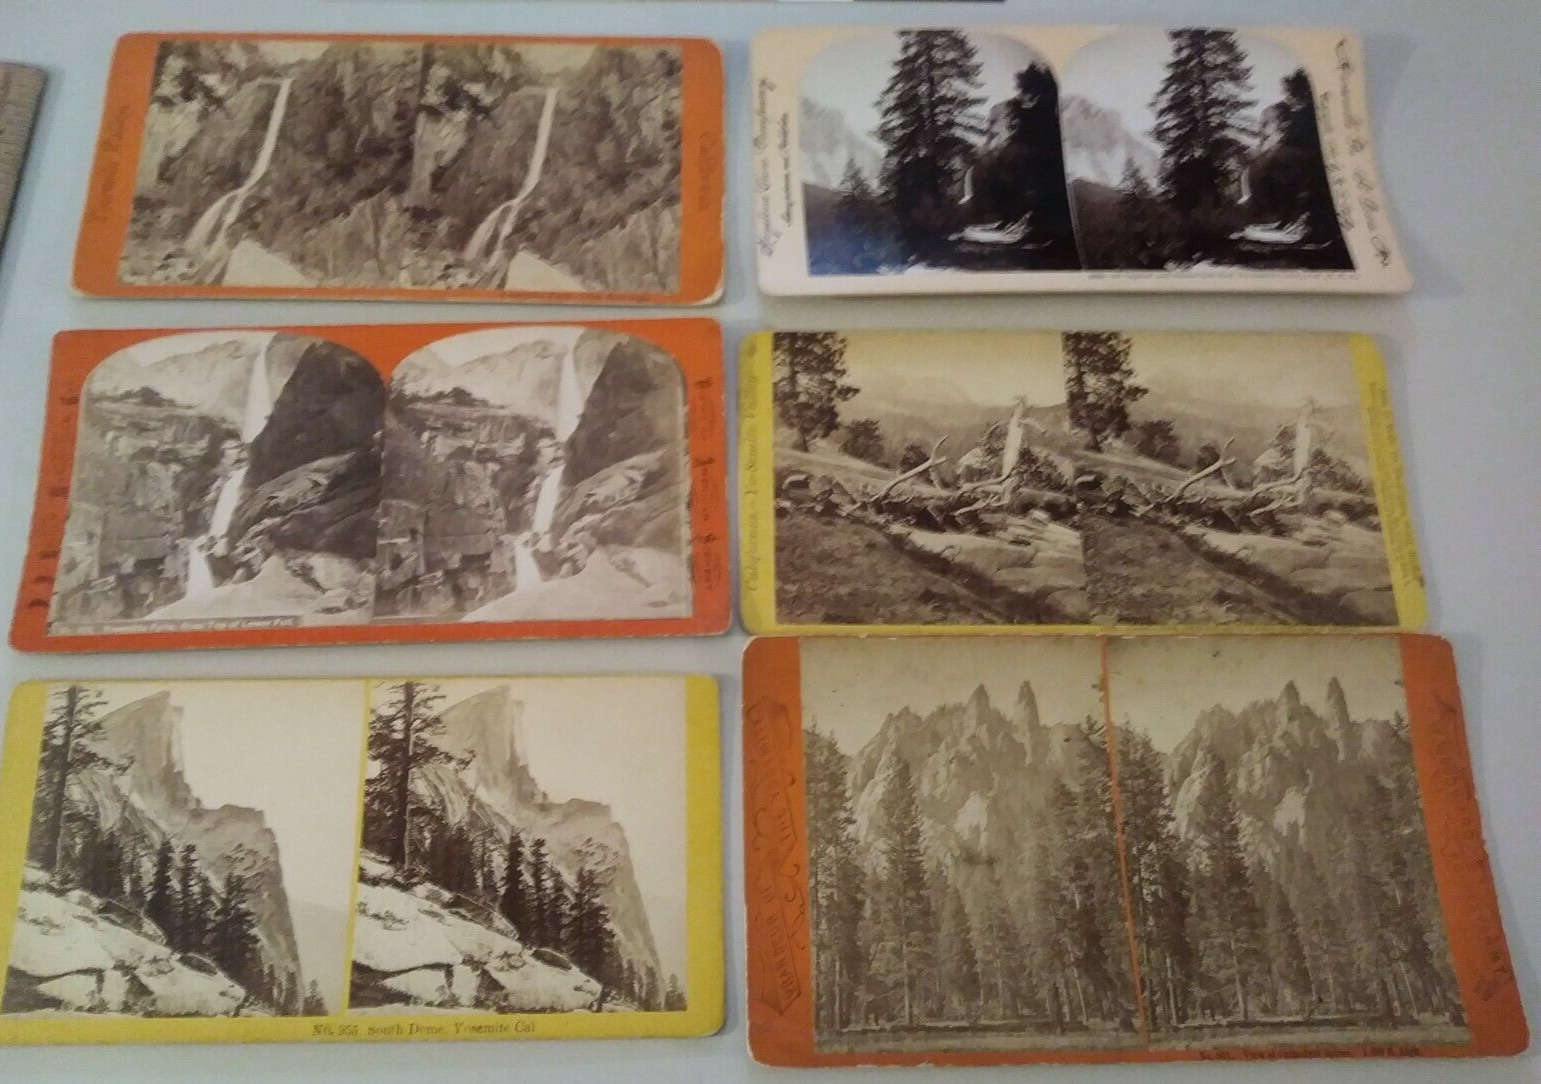 Yosemite Valley California Stereoview Photo South Dome